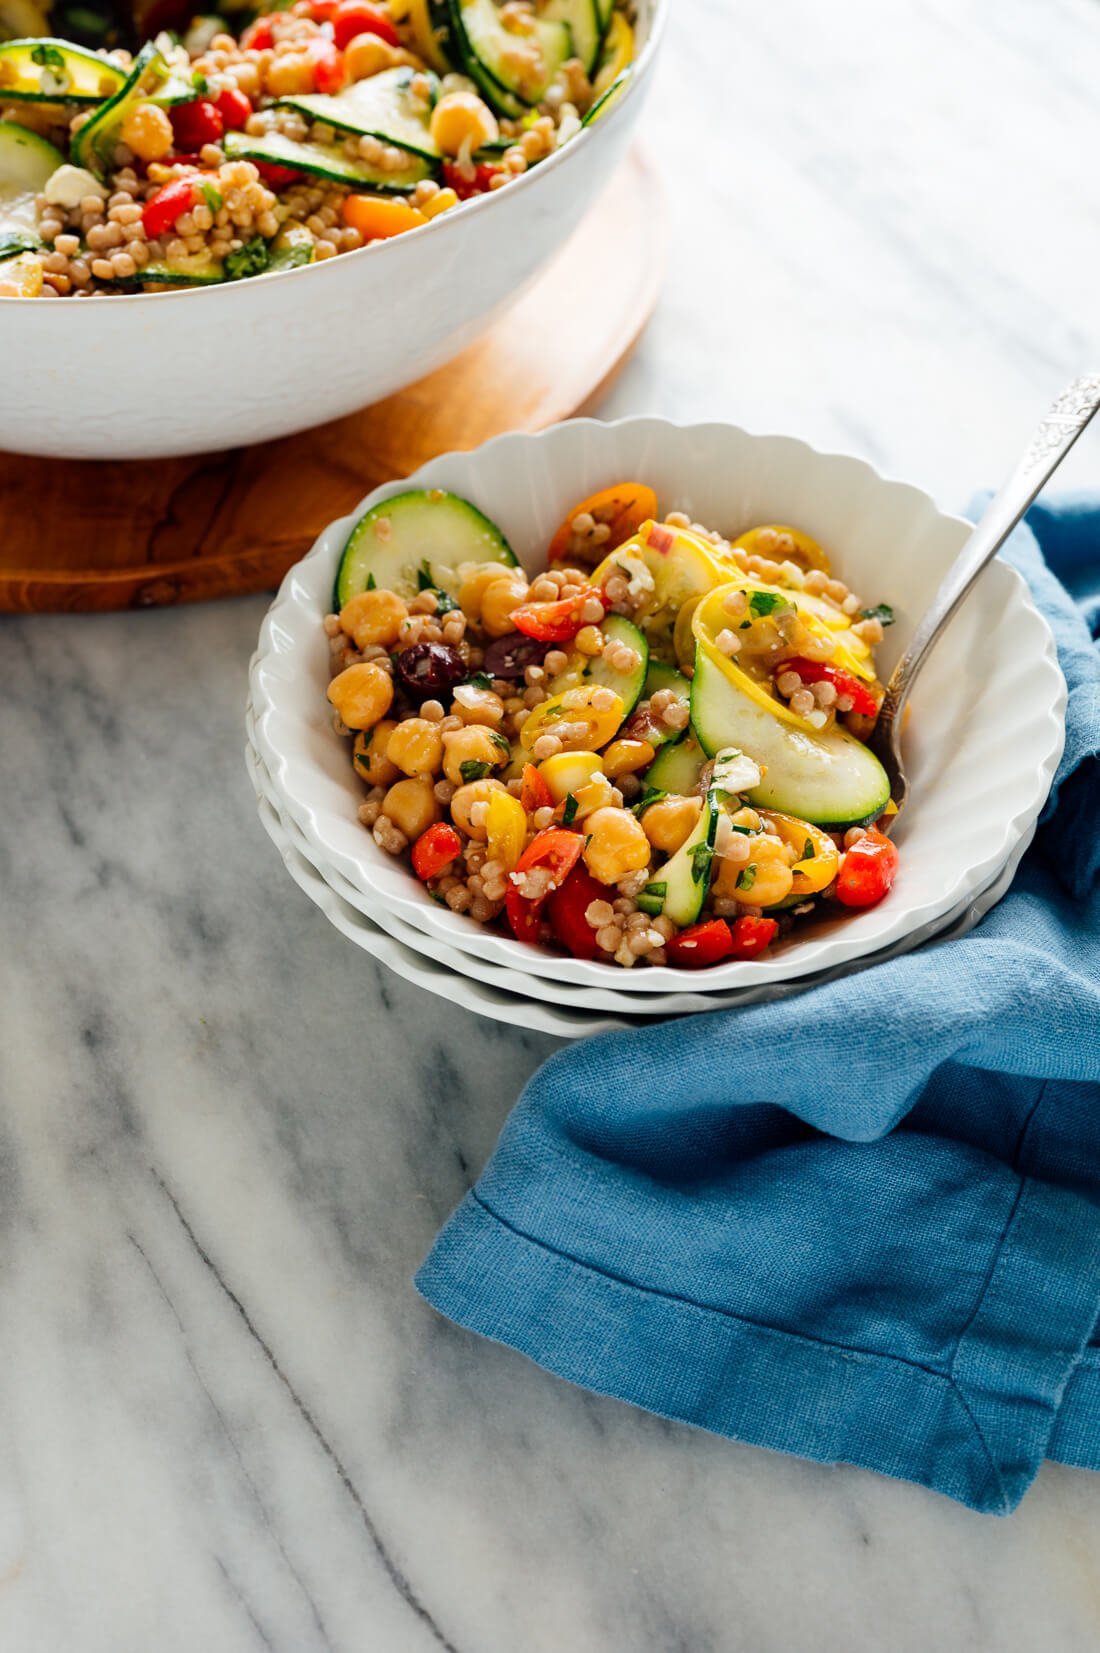 couscous salad recipe with mediterranean flavors